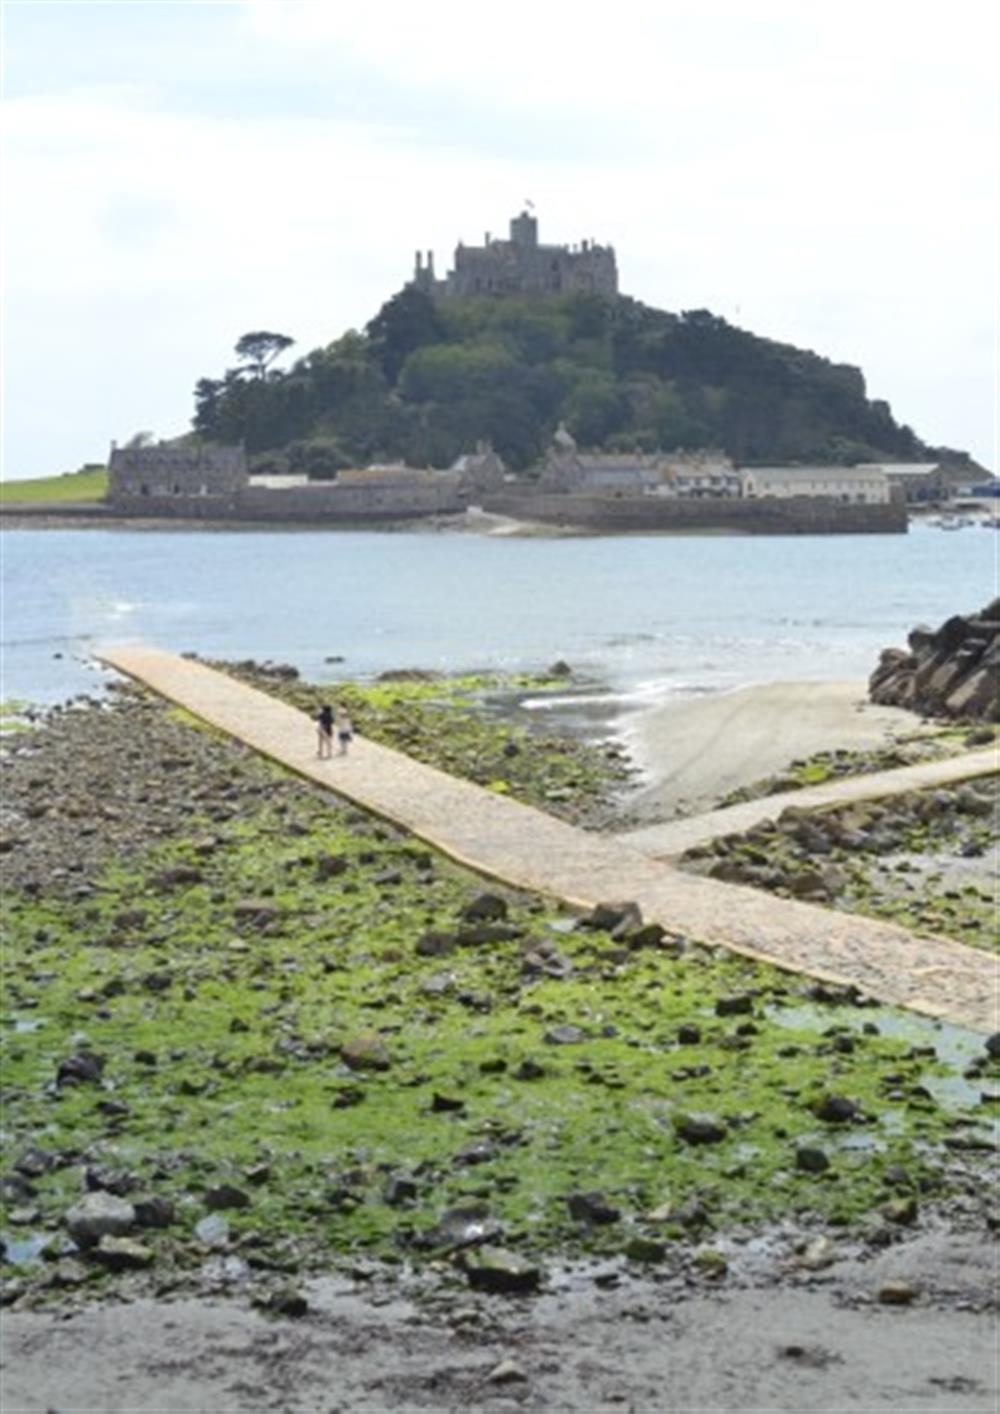 St Michael's Mount is 45 minutes away. Cross the causeway or catch the water-taxi across to the island. at Anchors Aweigh in Helford Passage